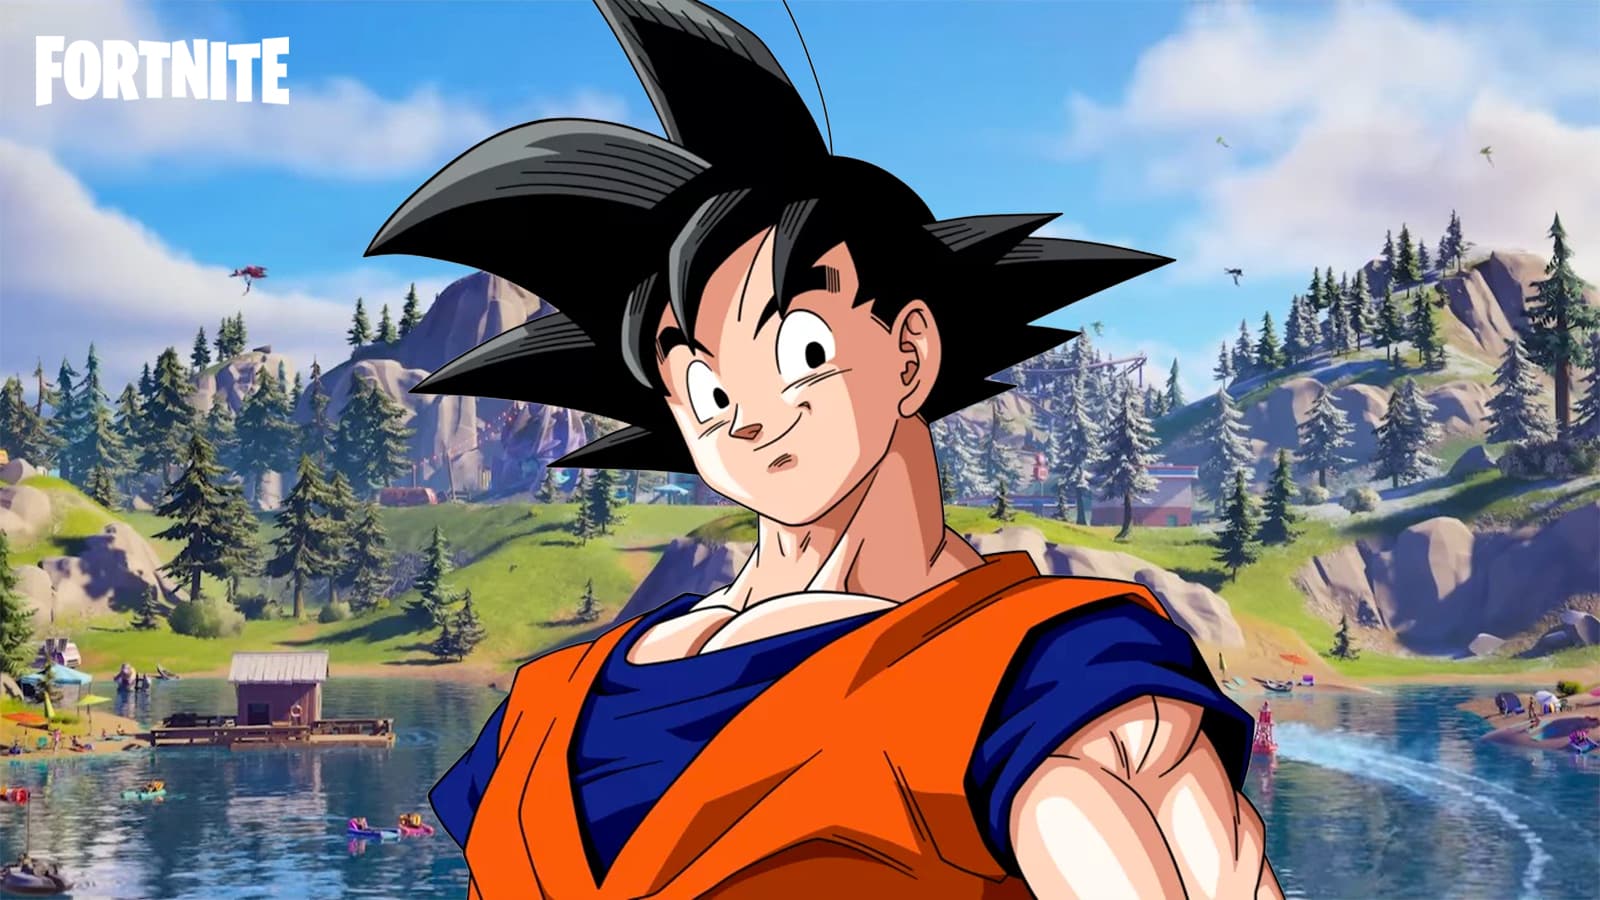 Rumor Guide - Dragon Ball Super: Six Months vs. Four Years Later